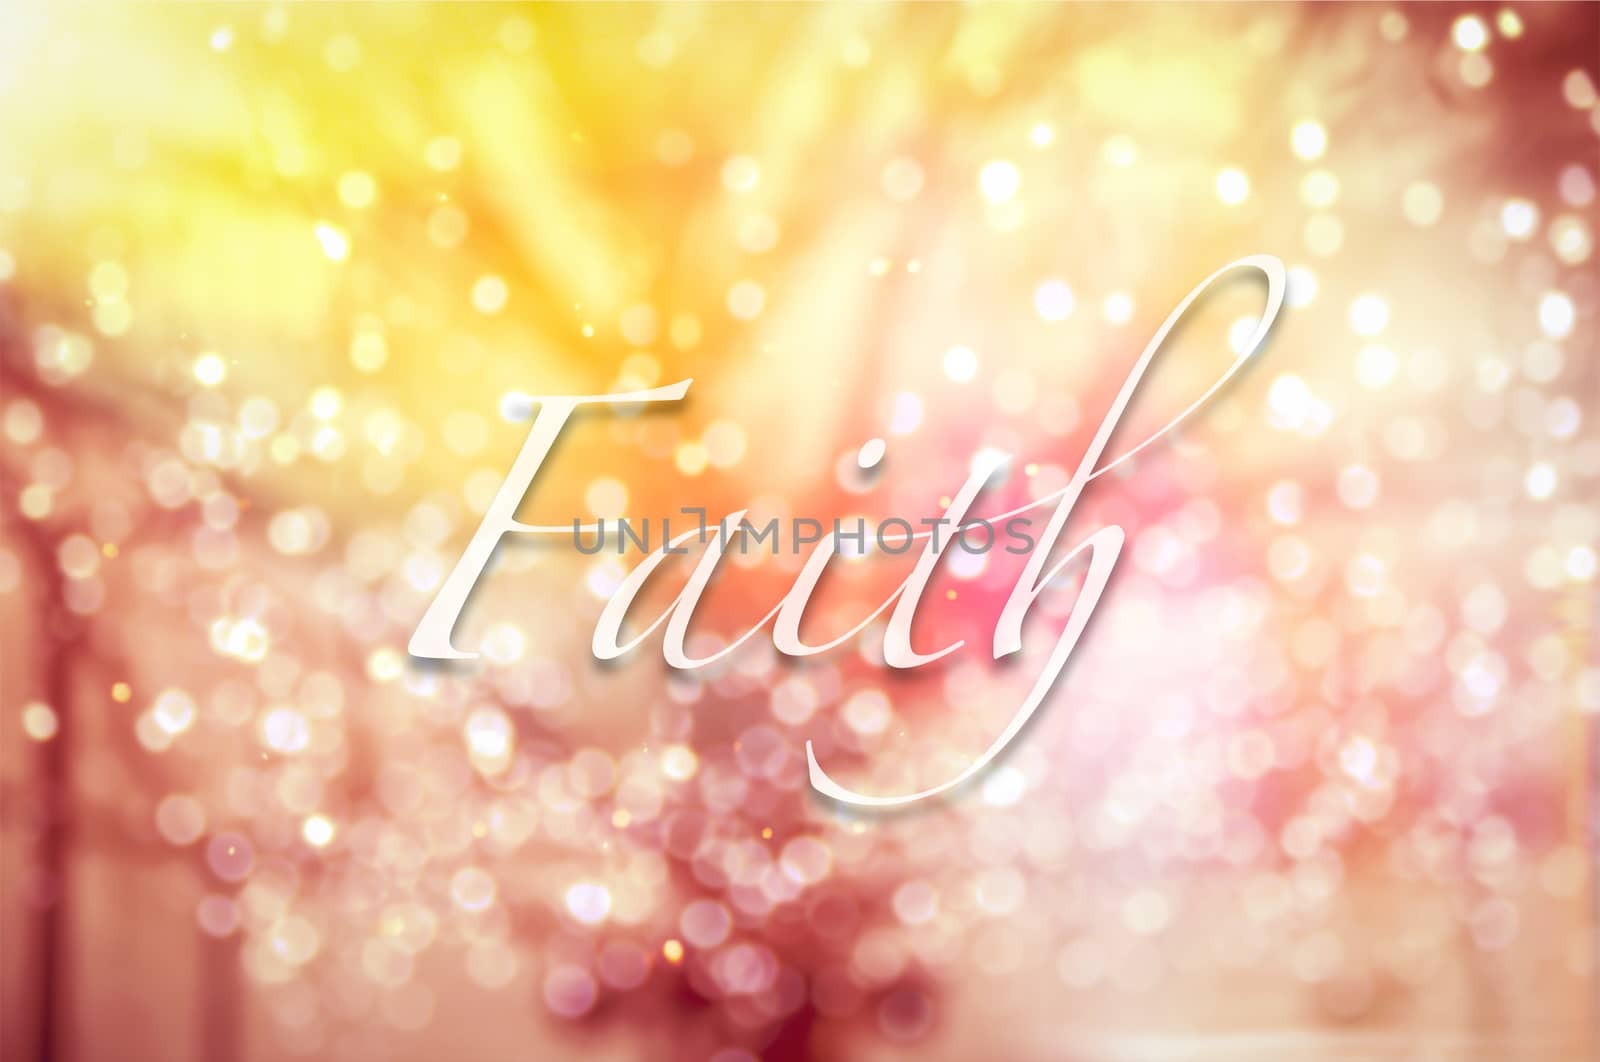 Faith typographic word on abstract bokeh background, vintage and retro style.